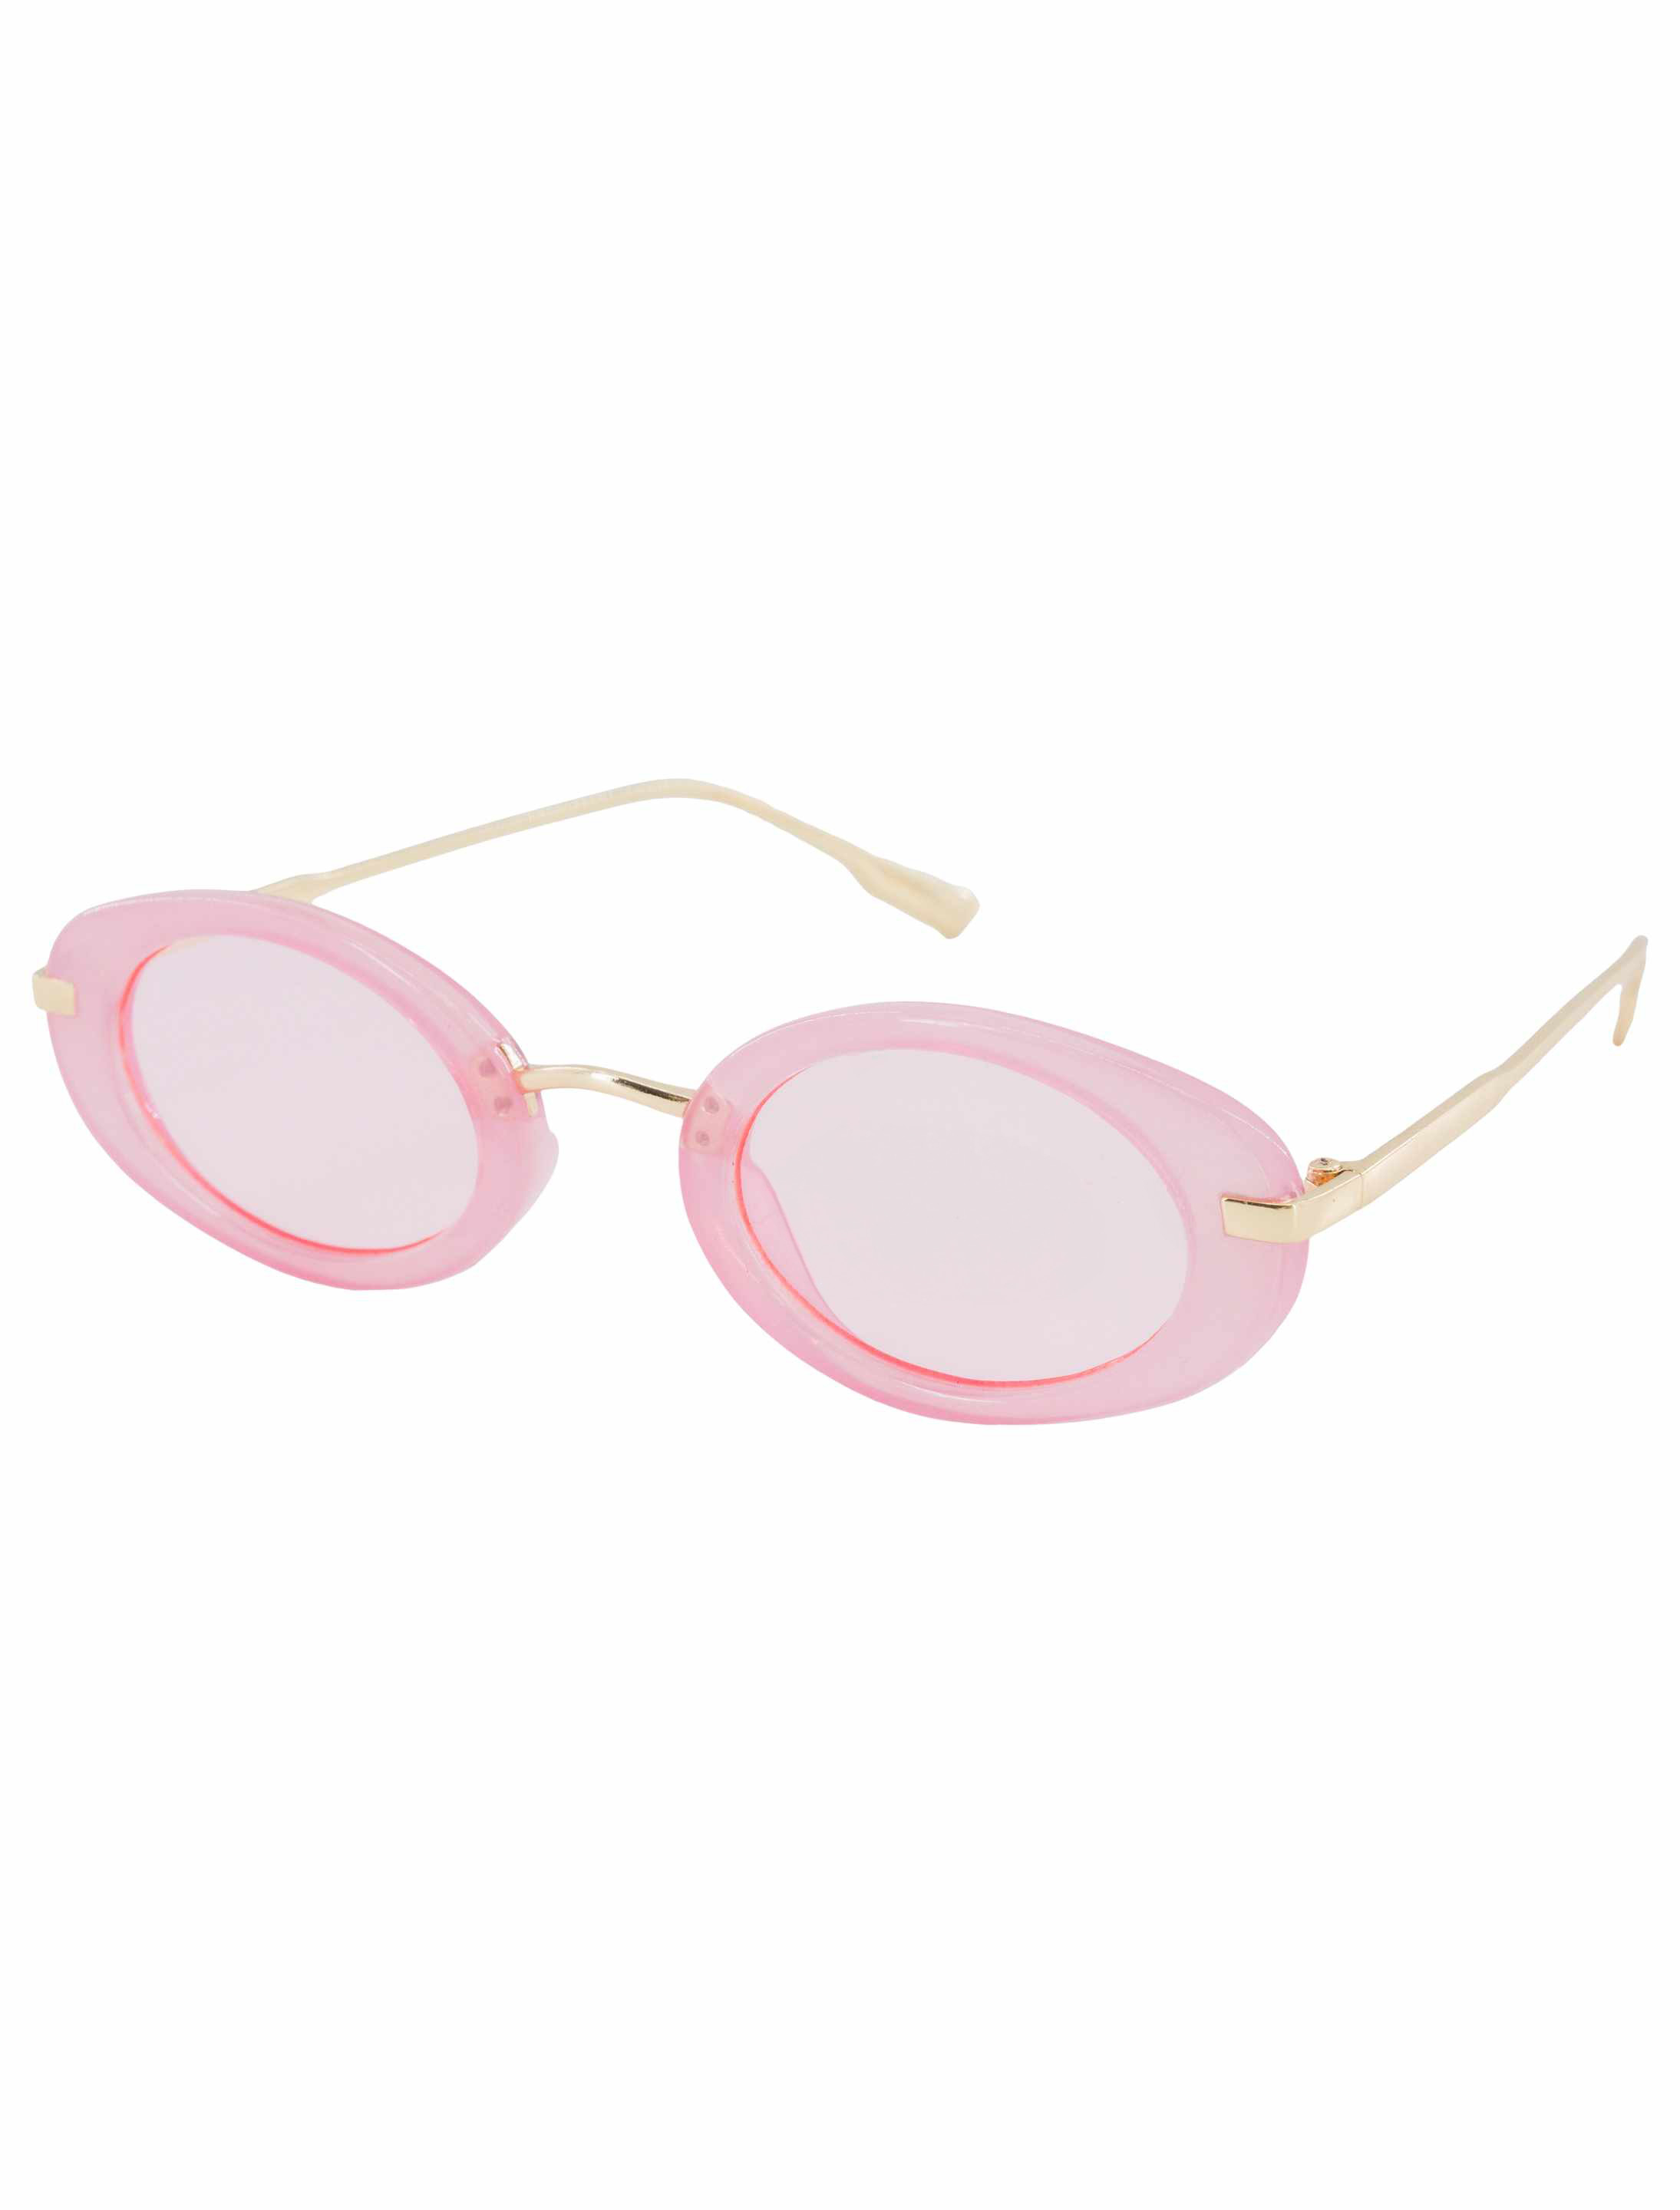 Brille oval pink